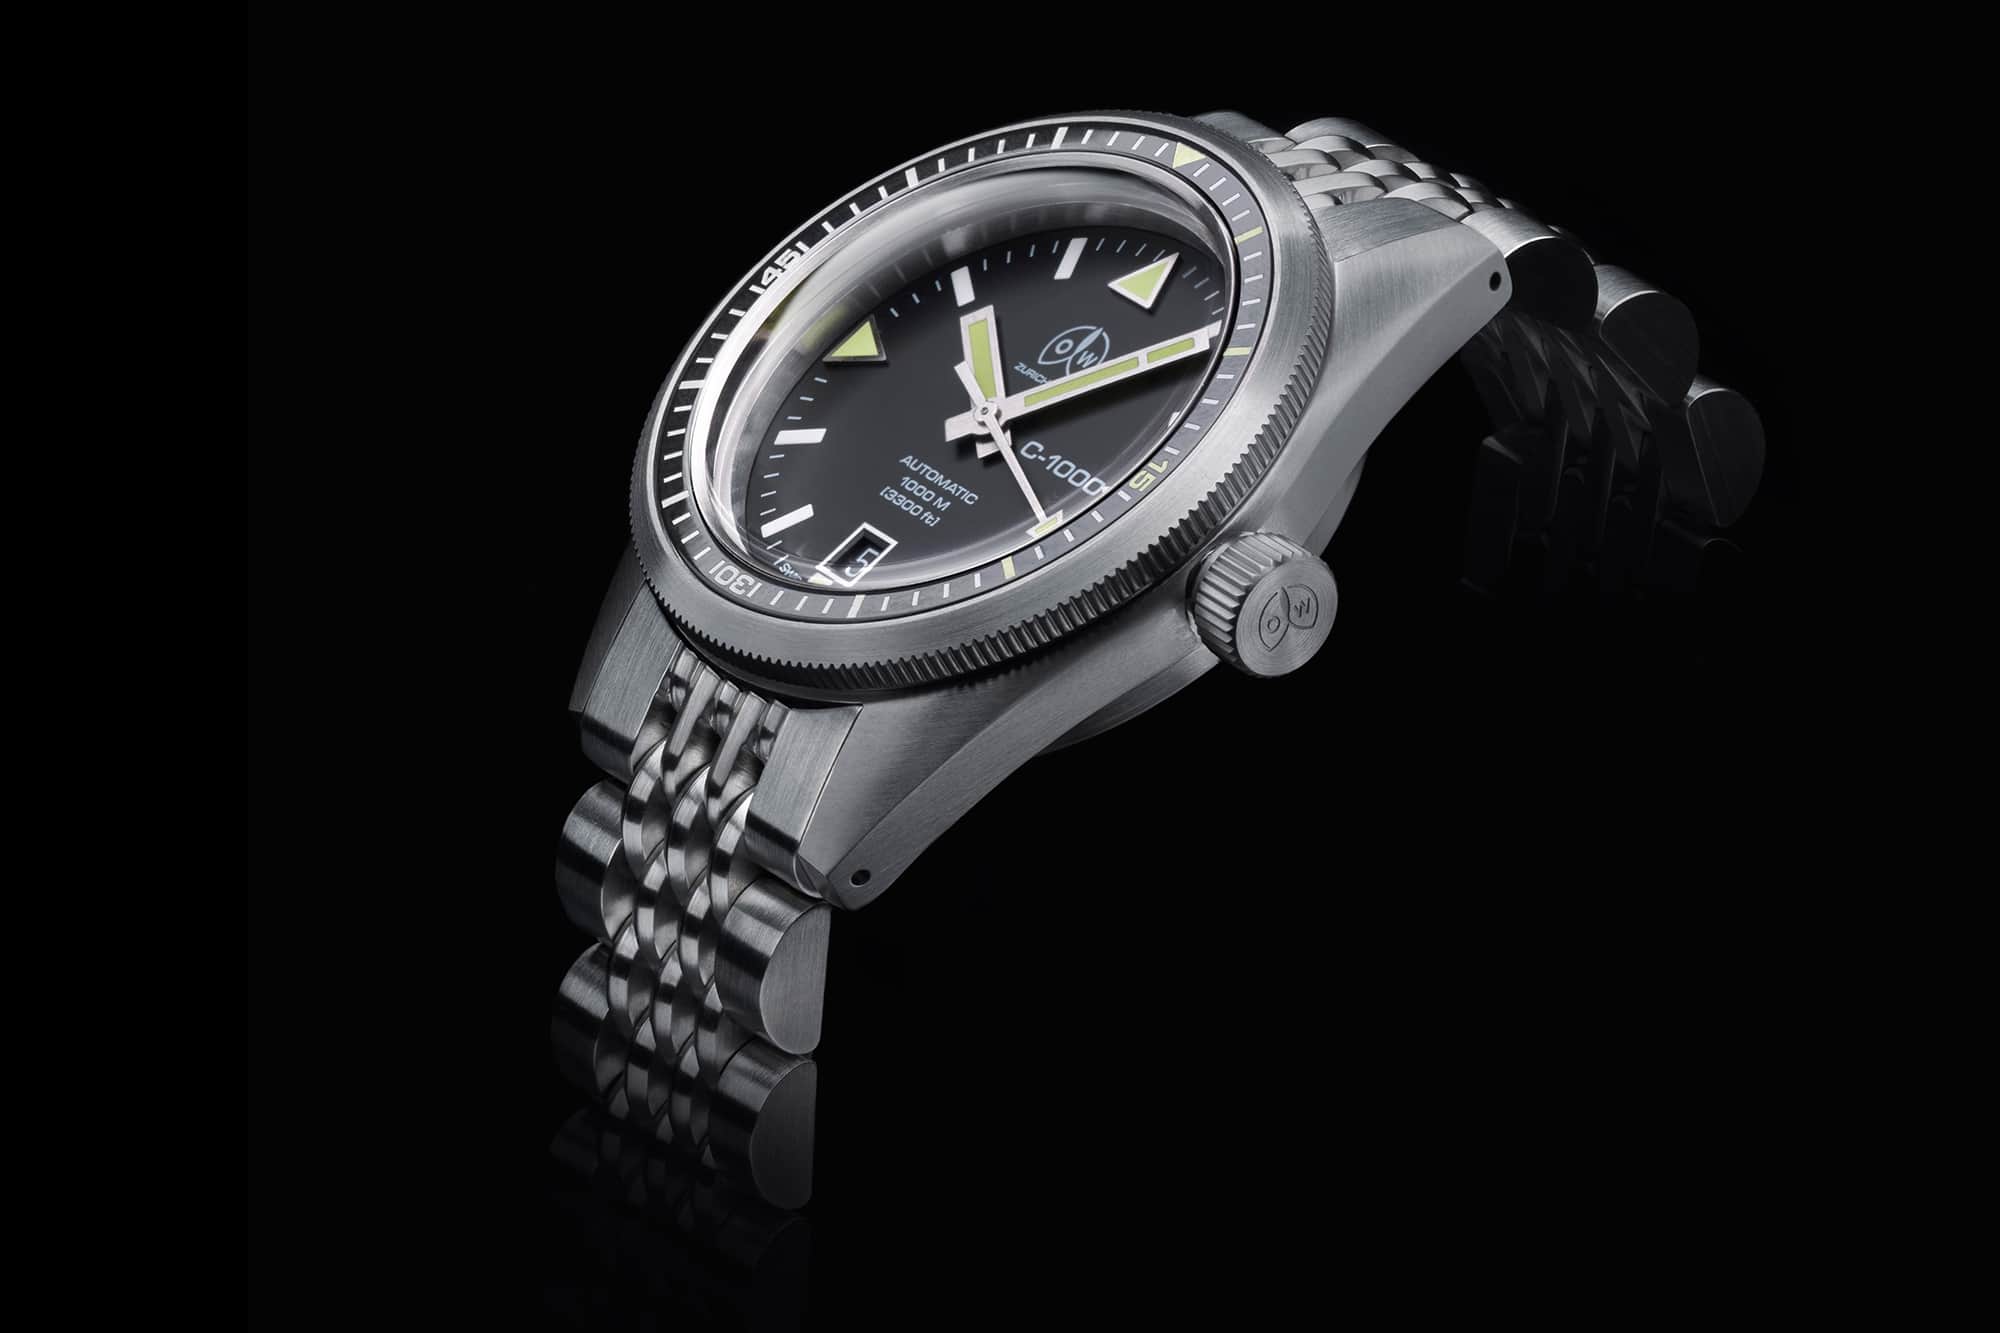 Ollech & Wajs Revive a 1000M Icon with the C-1000 Diver